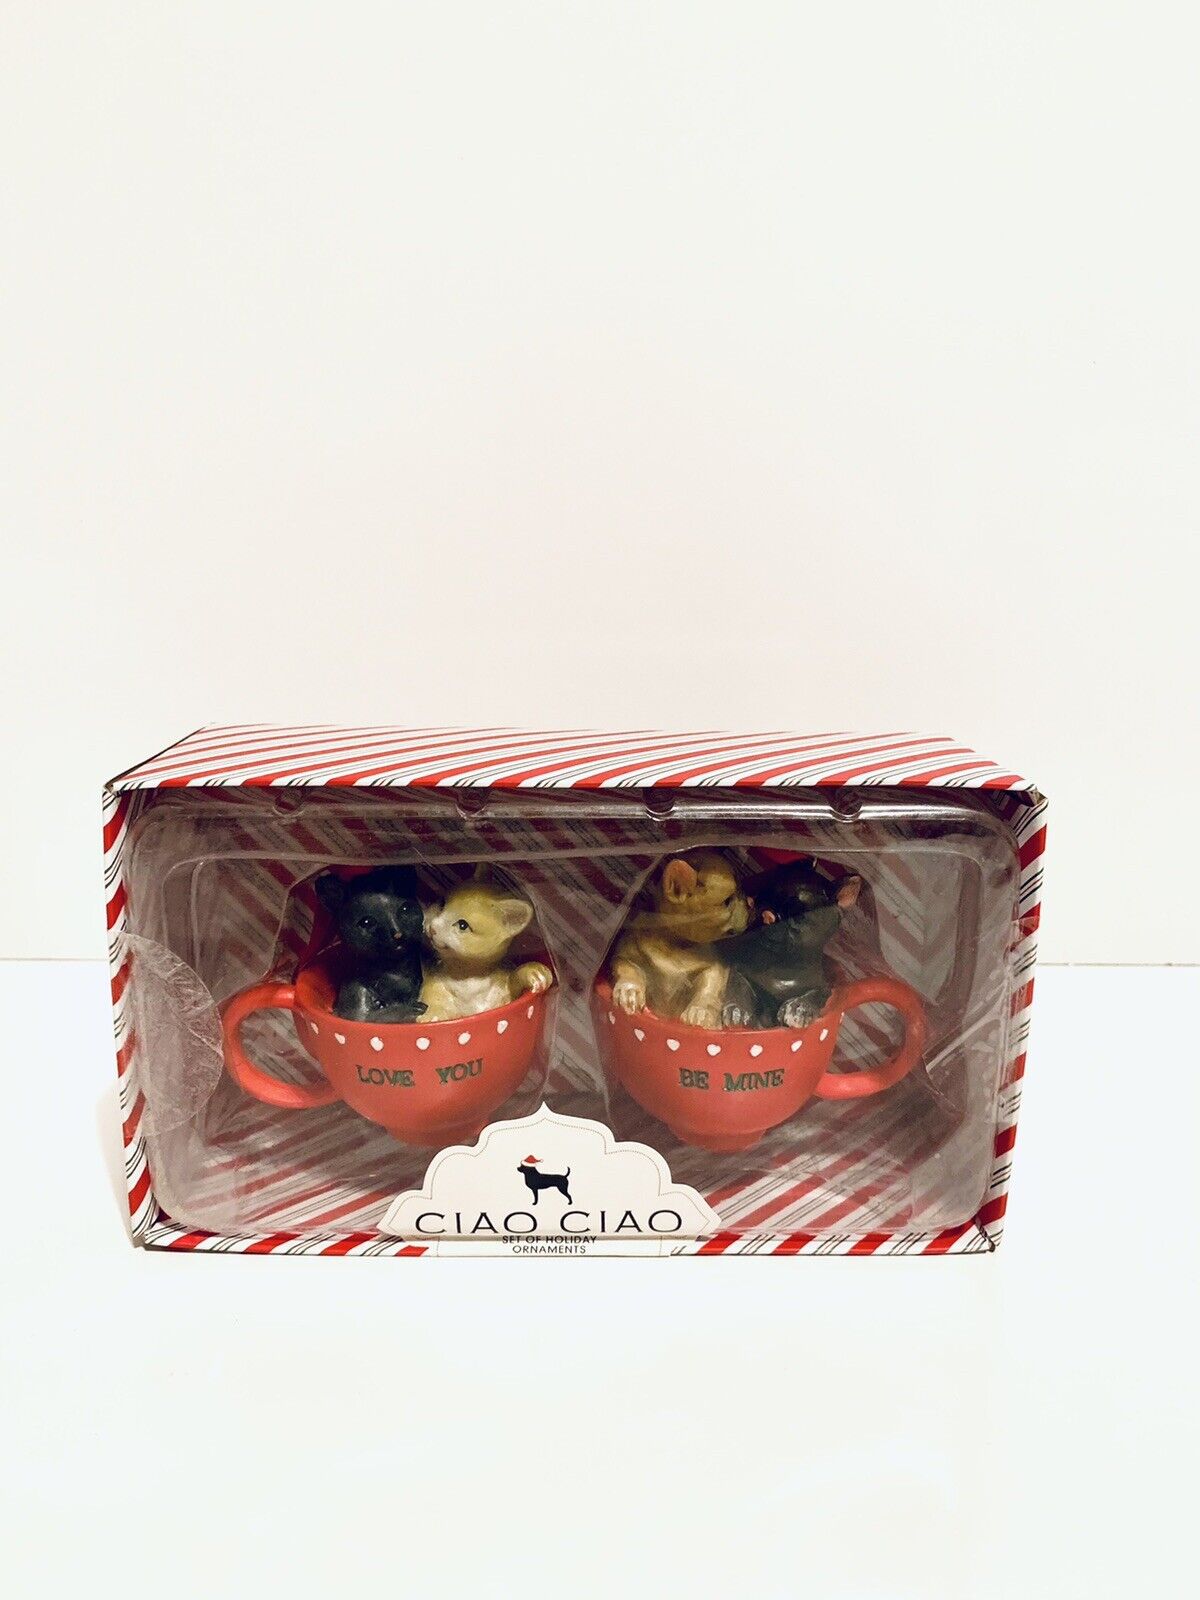 Dogs & Cats Resin Tea Cup Love ,You Be Mine Ciao Ciao Christmas Holiday Set NIB